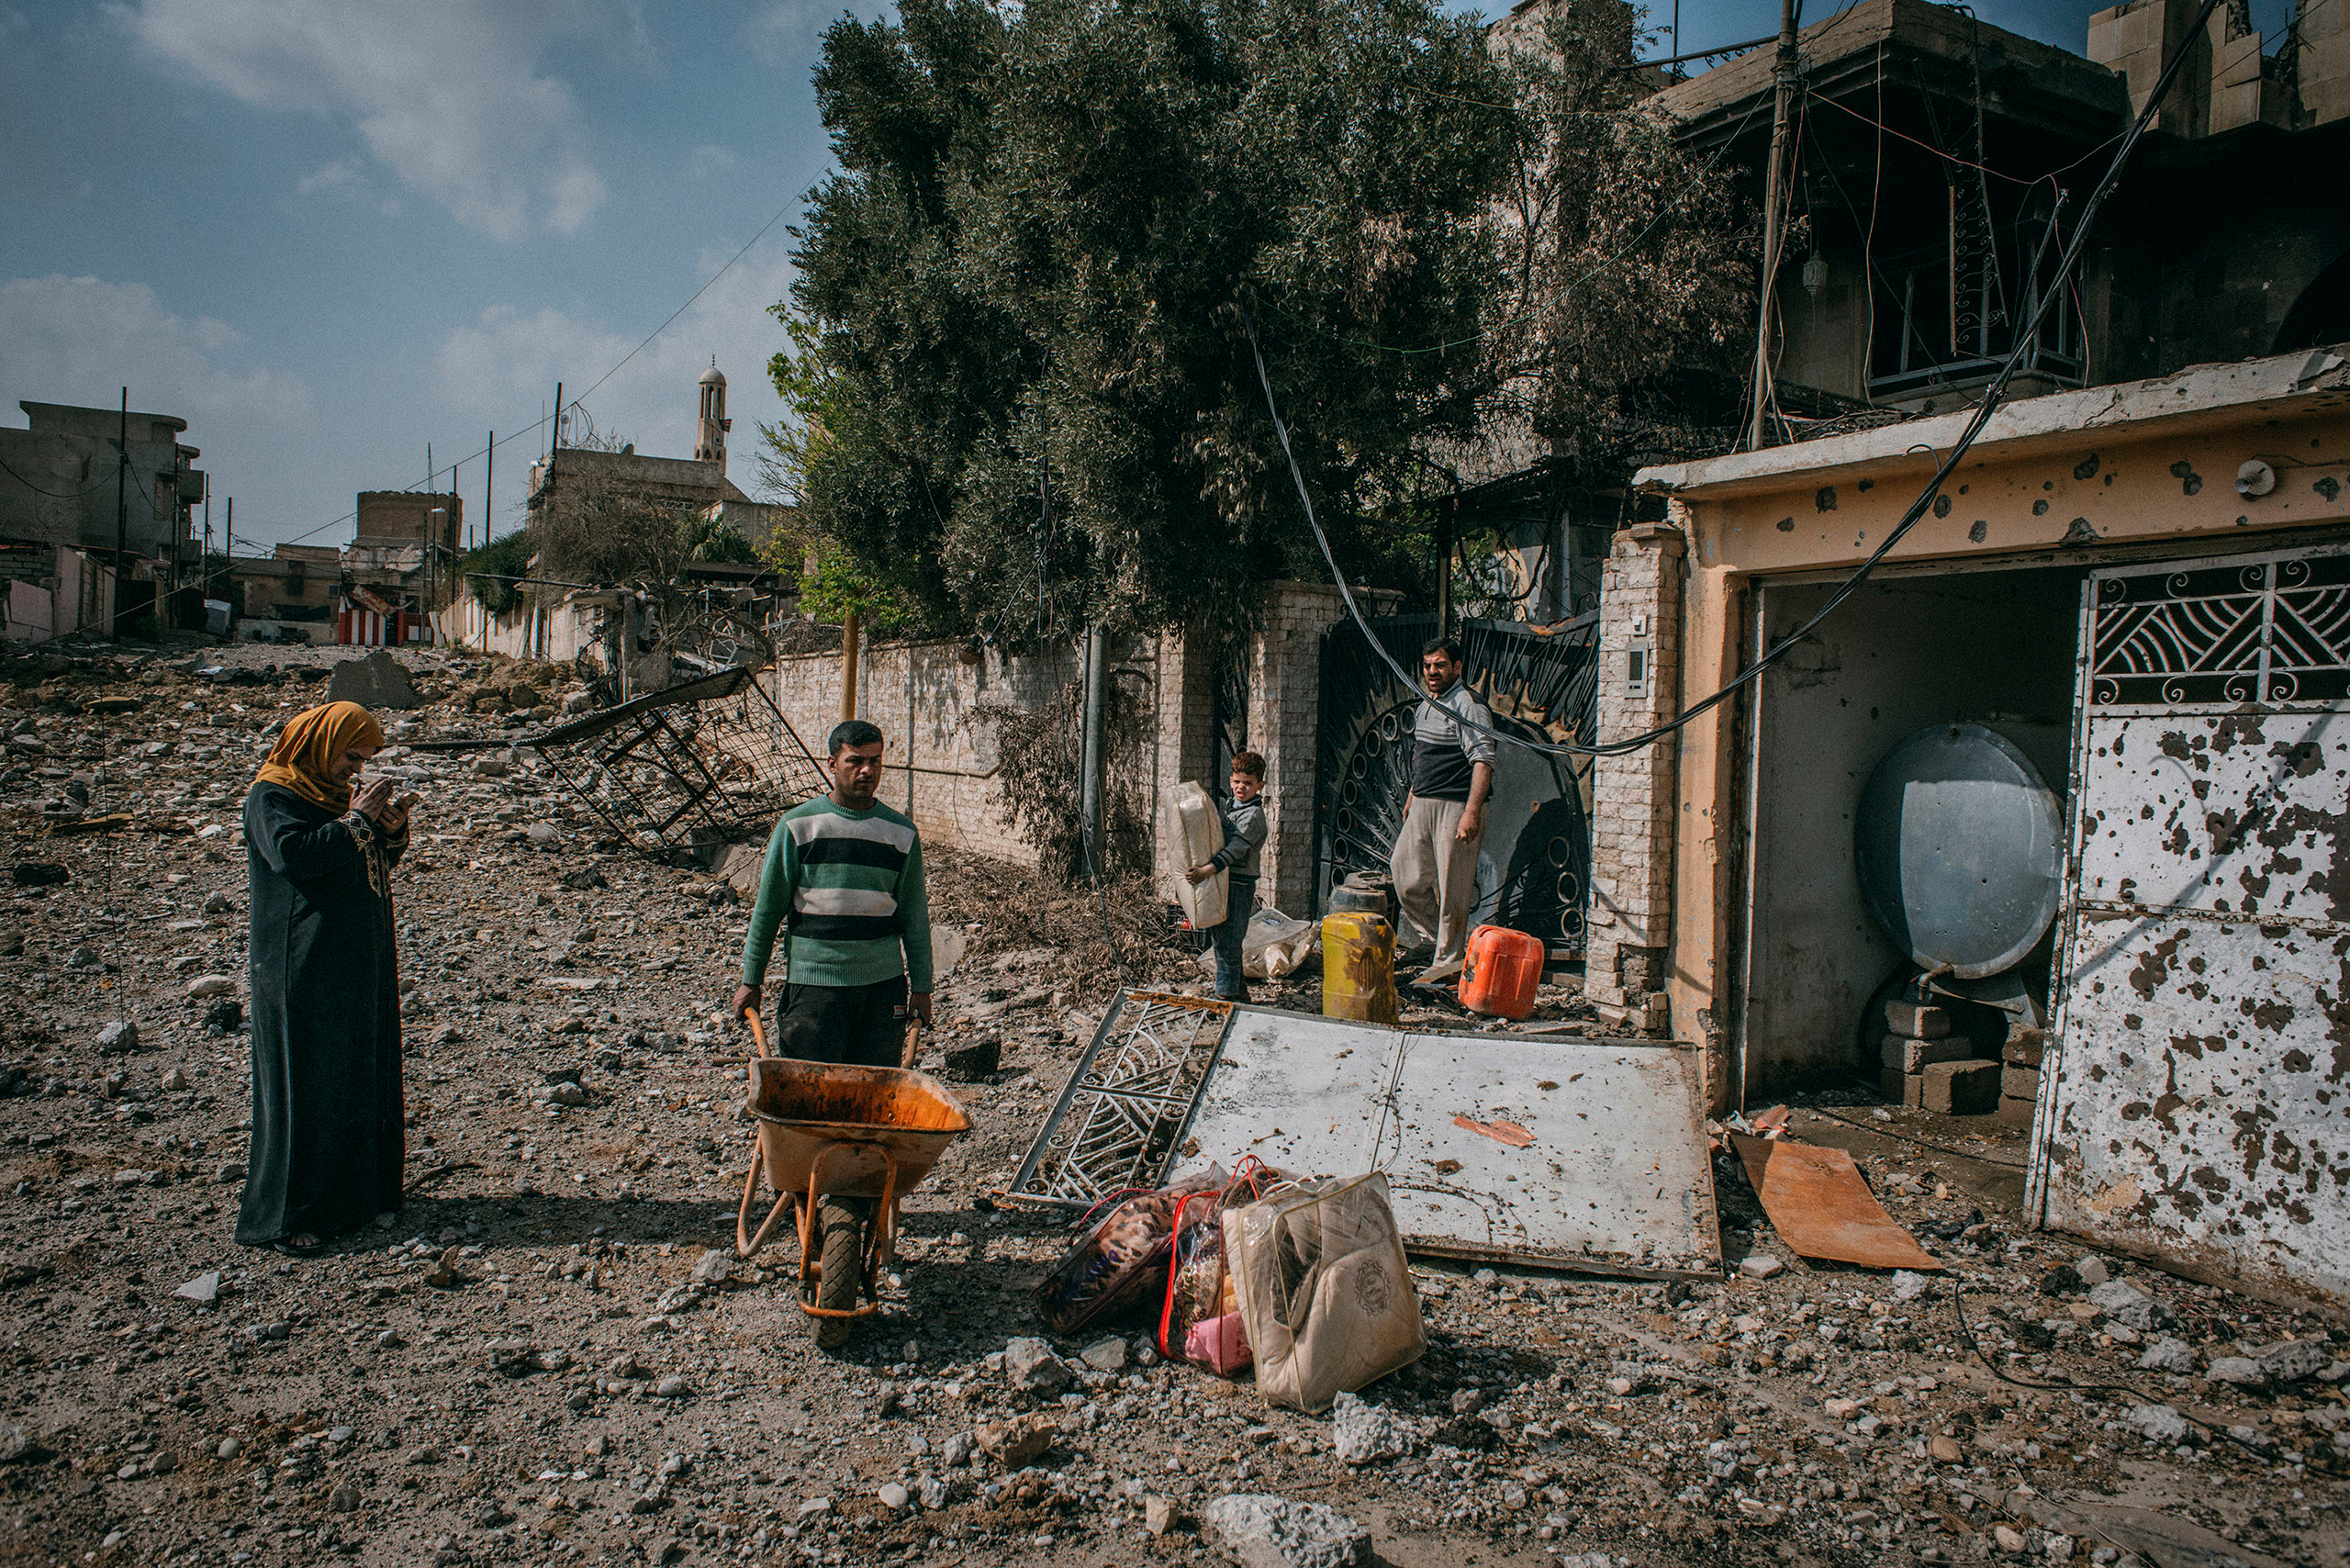 The home of Median Hikmat al-Galou was destroyed during fighting between Iraqi forces and ISIS in southwest Mosul in February 2017. (Emanuele Satolli for TIME)